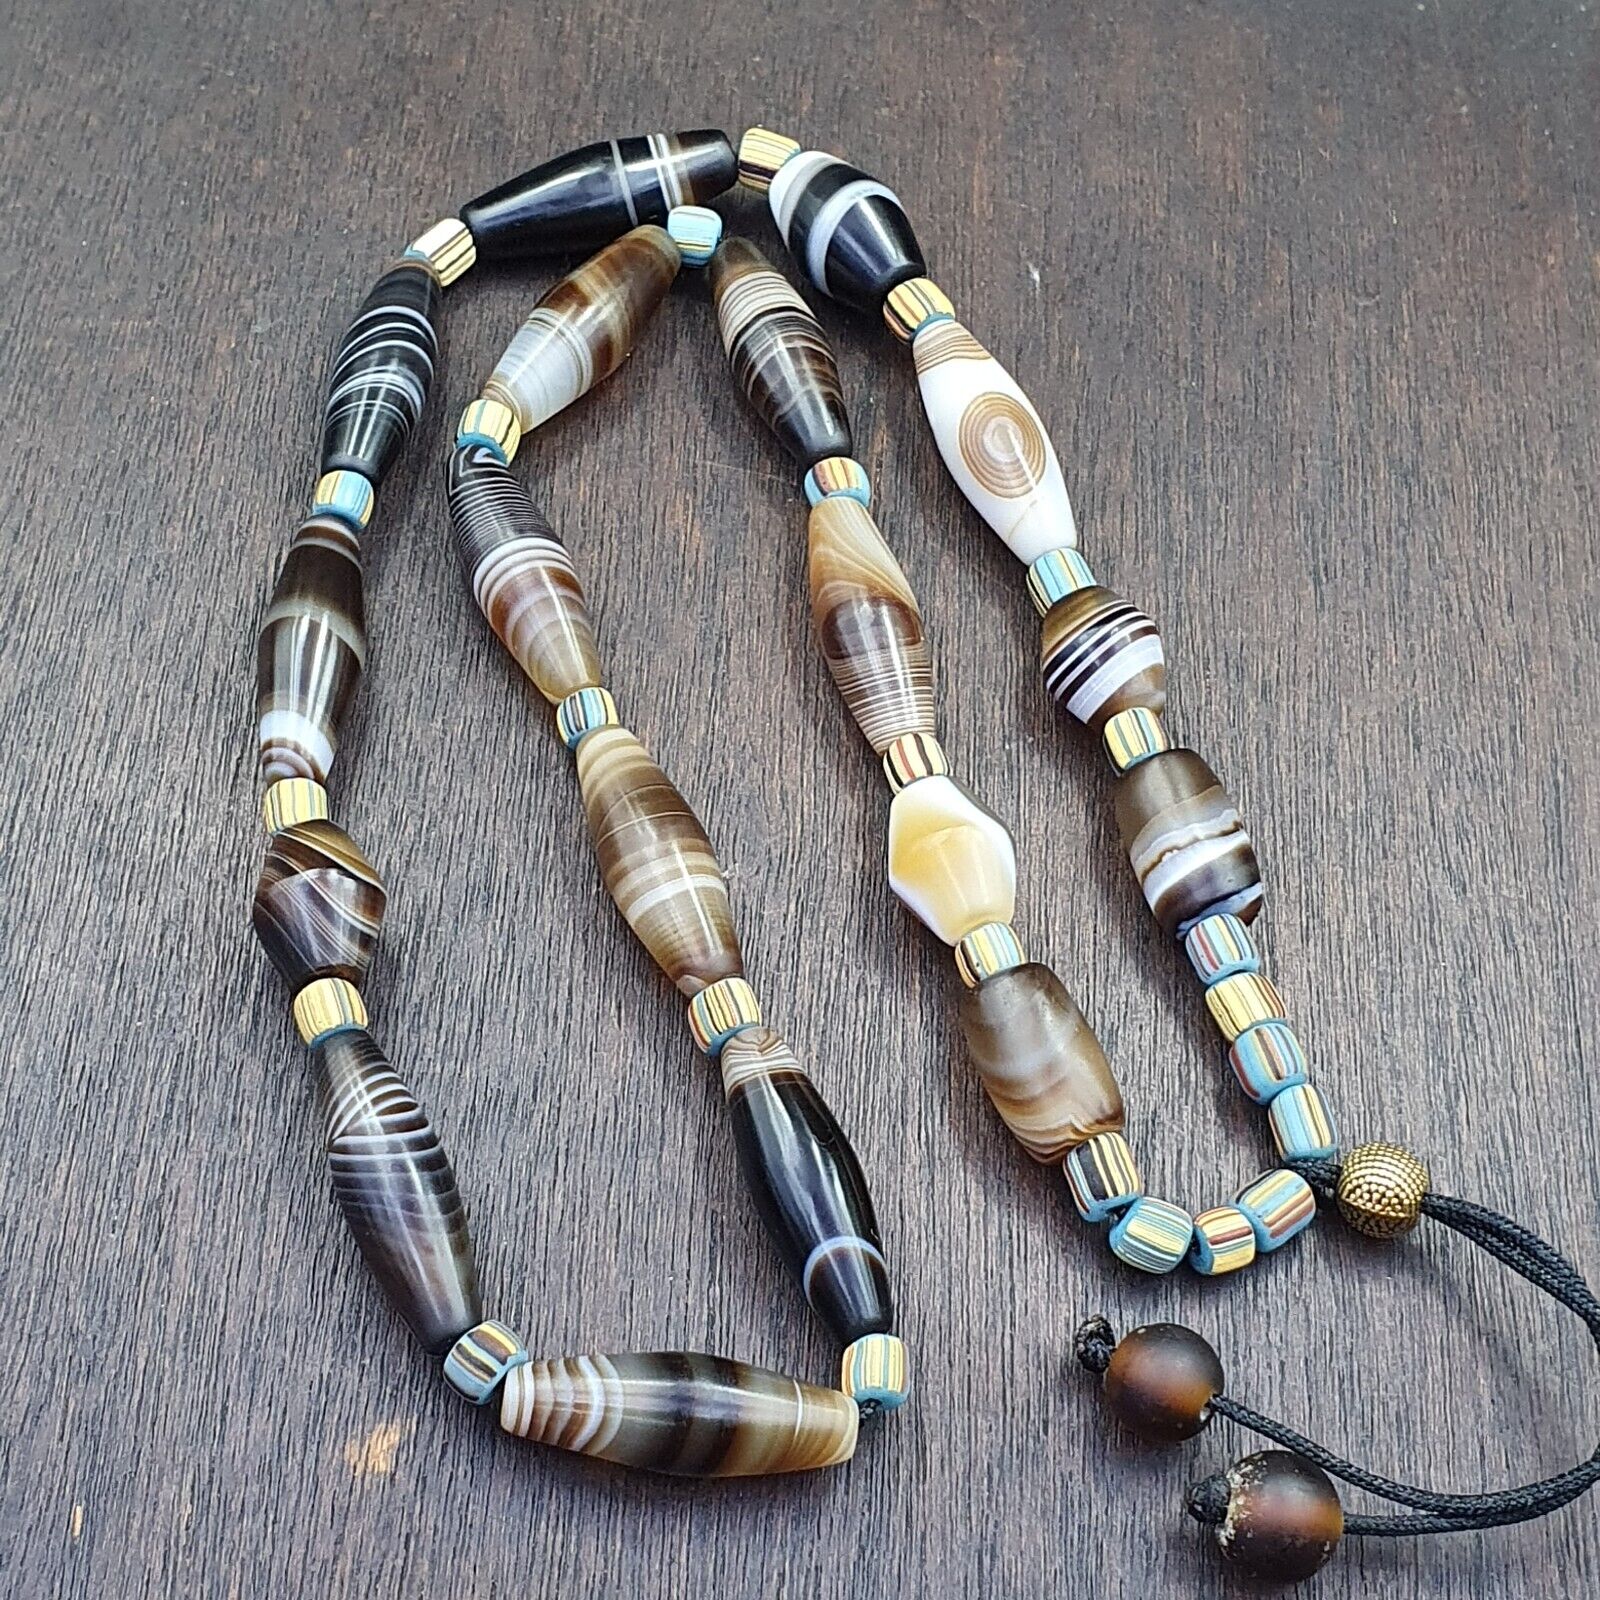 Antique Yemeni Middle Eastern Agate Eyes Patterns Suleimani Agate Necklace